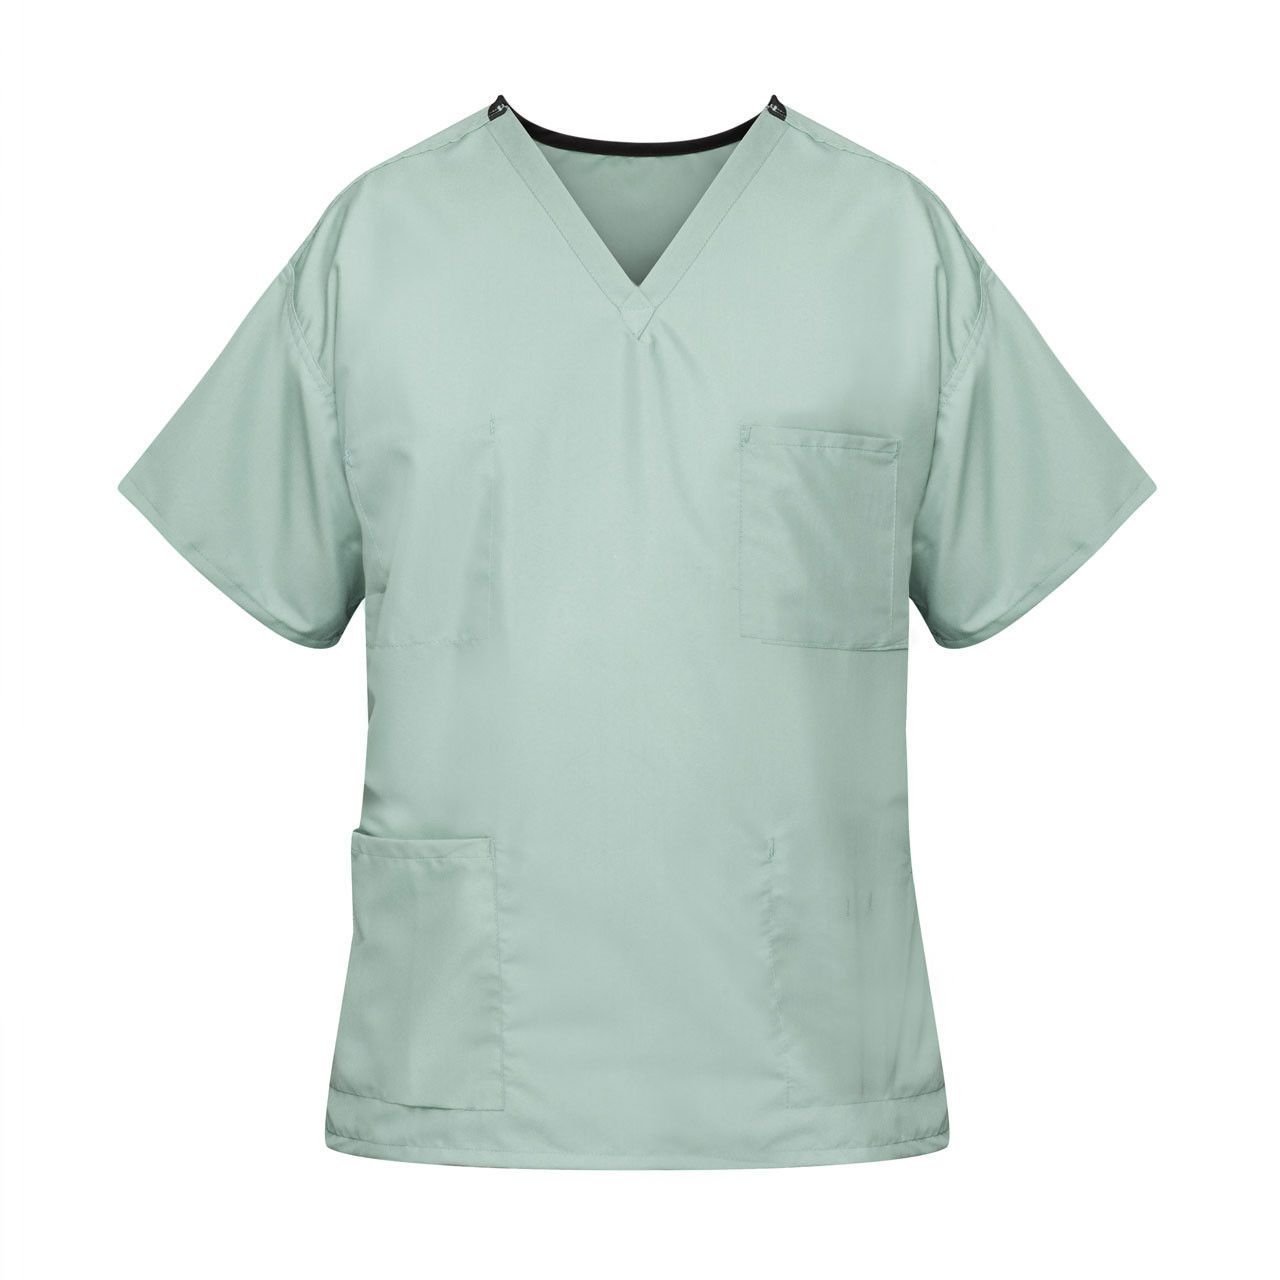 What features does the Misty Green Scrub Top offer in the Poplin Unisex Reversible version?